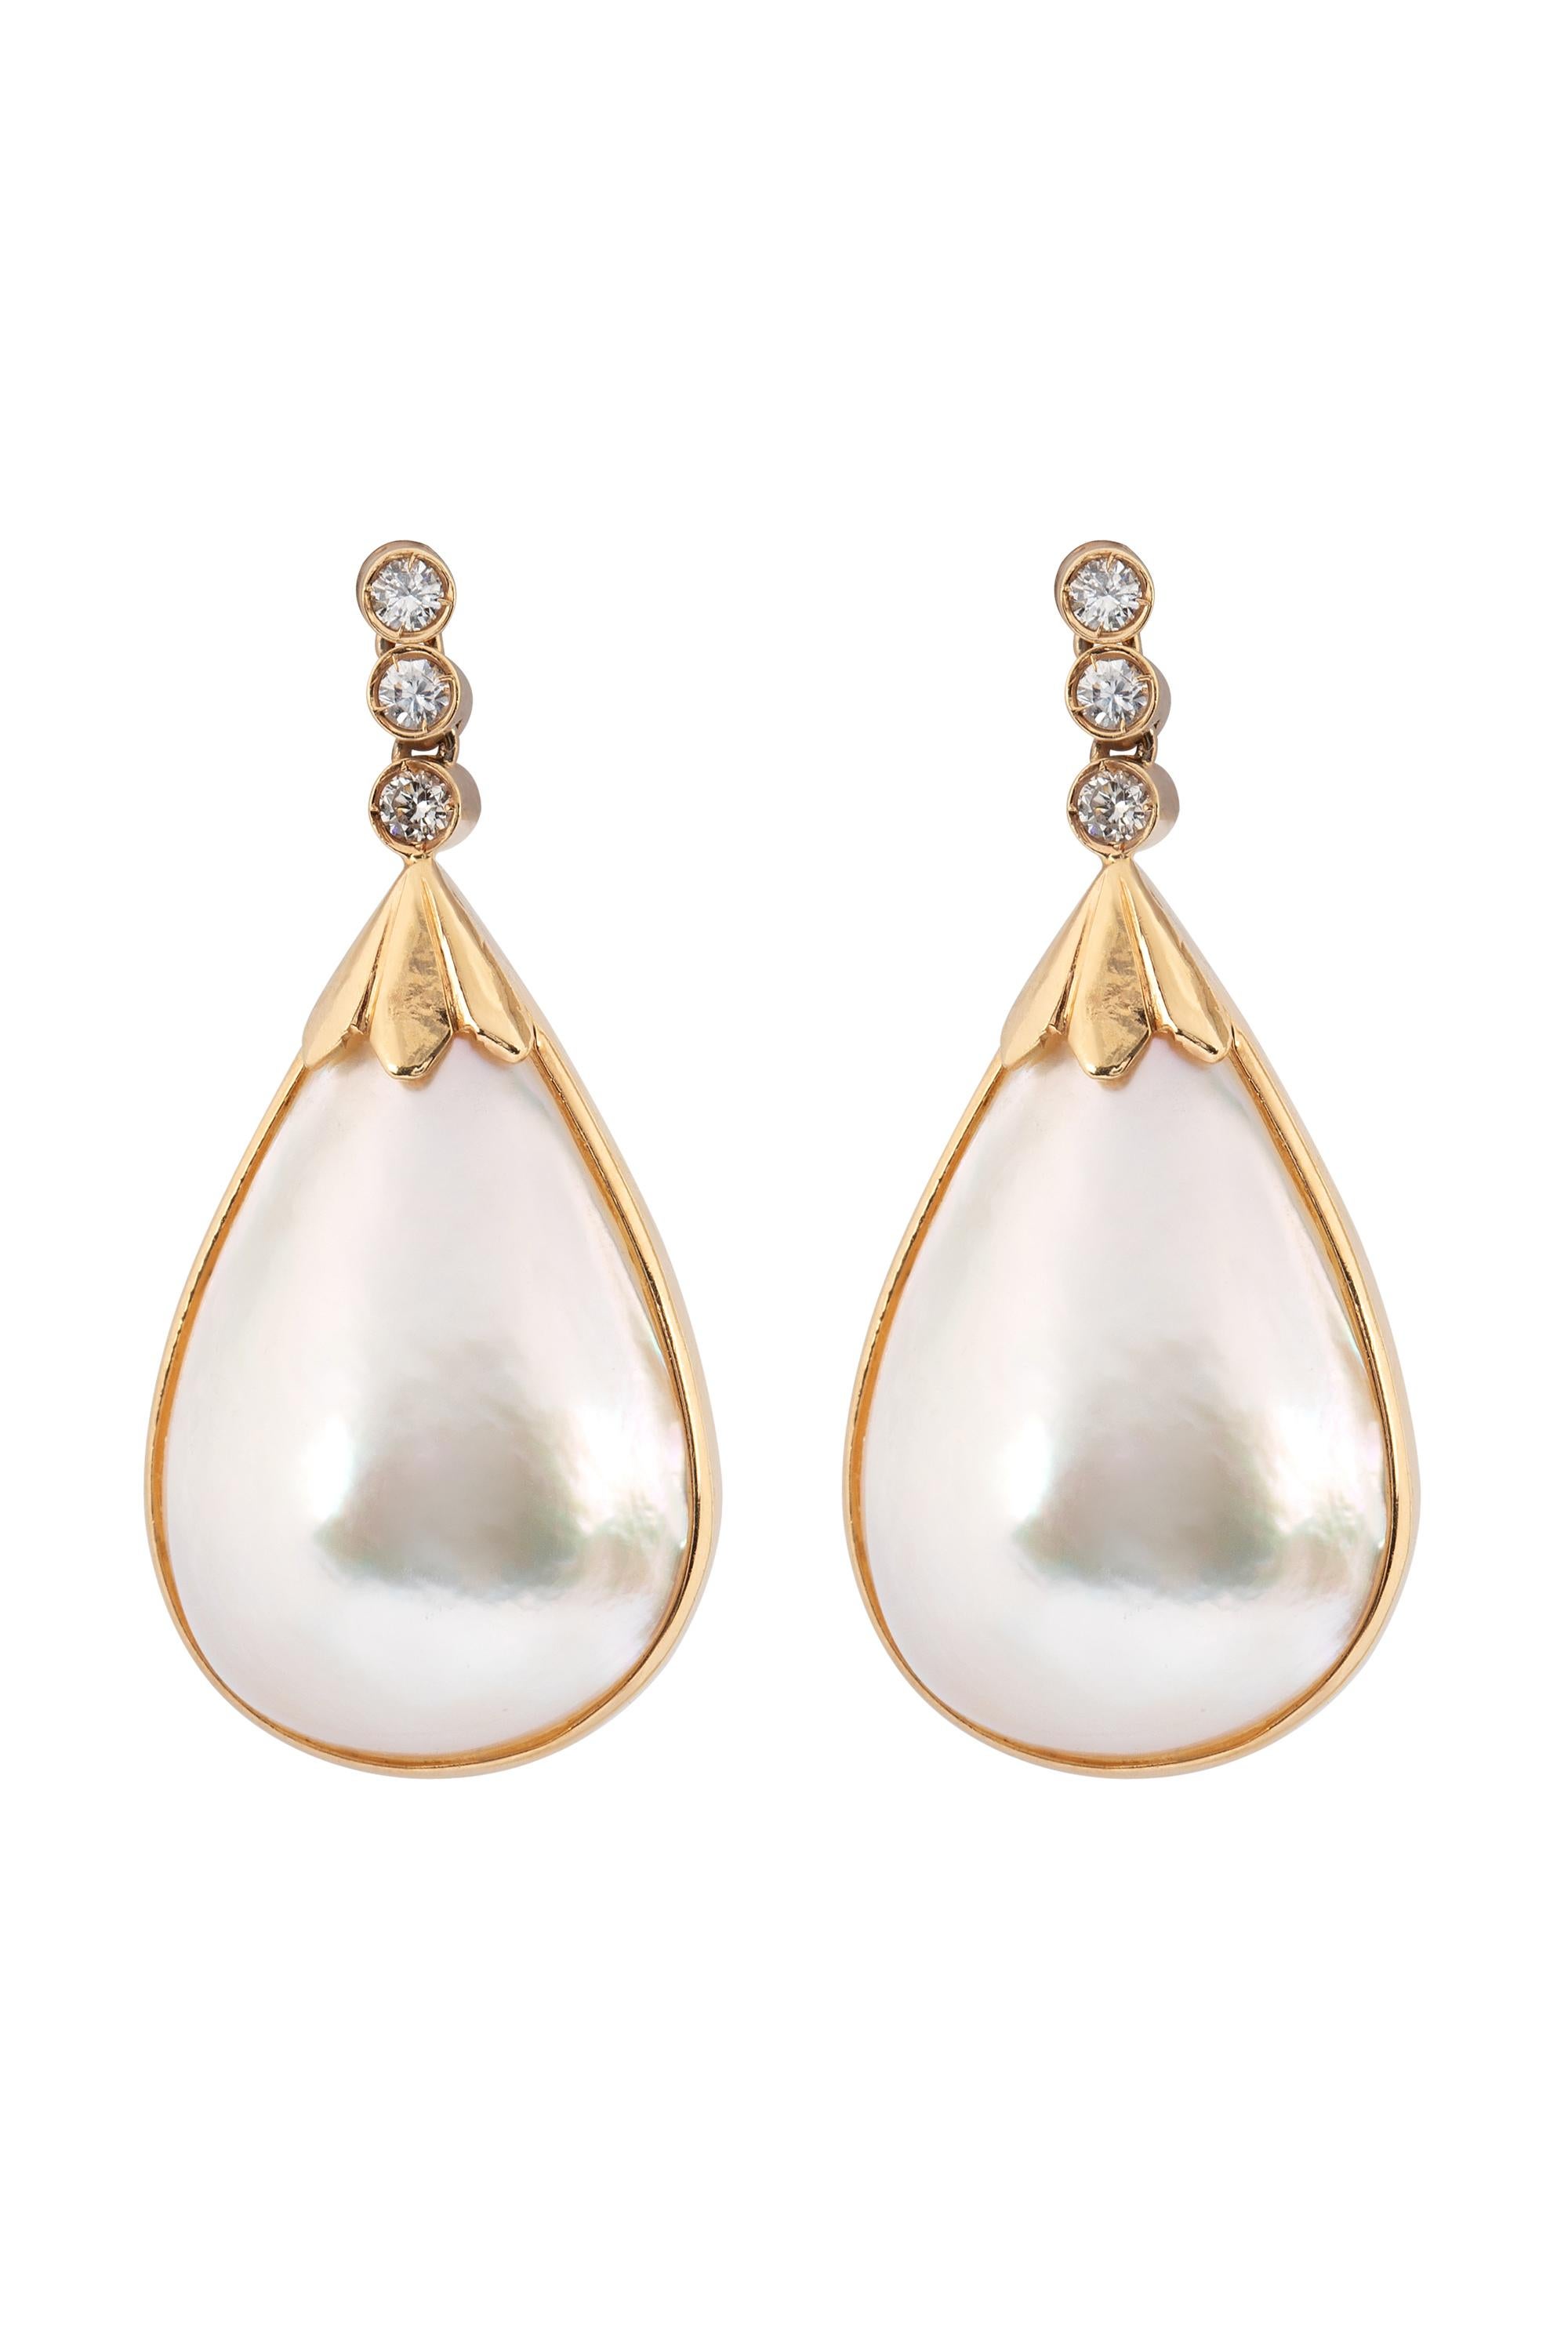 Vintage Mabé Pearl and Diamond Drop Earrings In Good Condition For Sale In beverly hills, CA